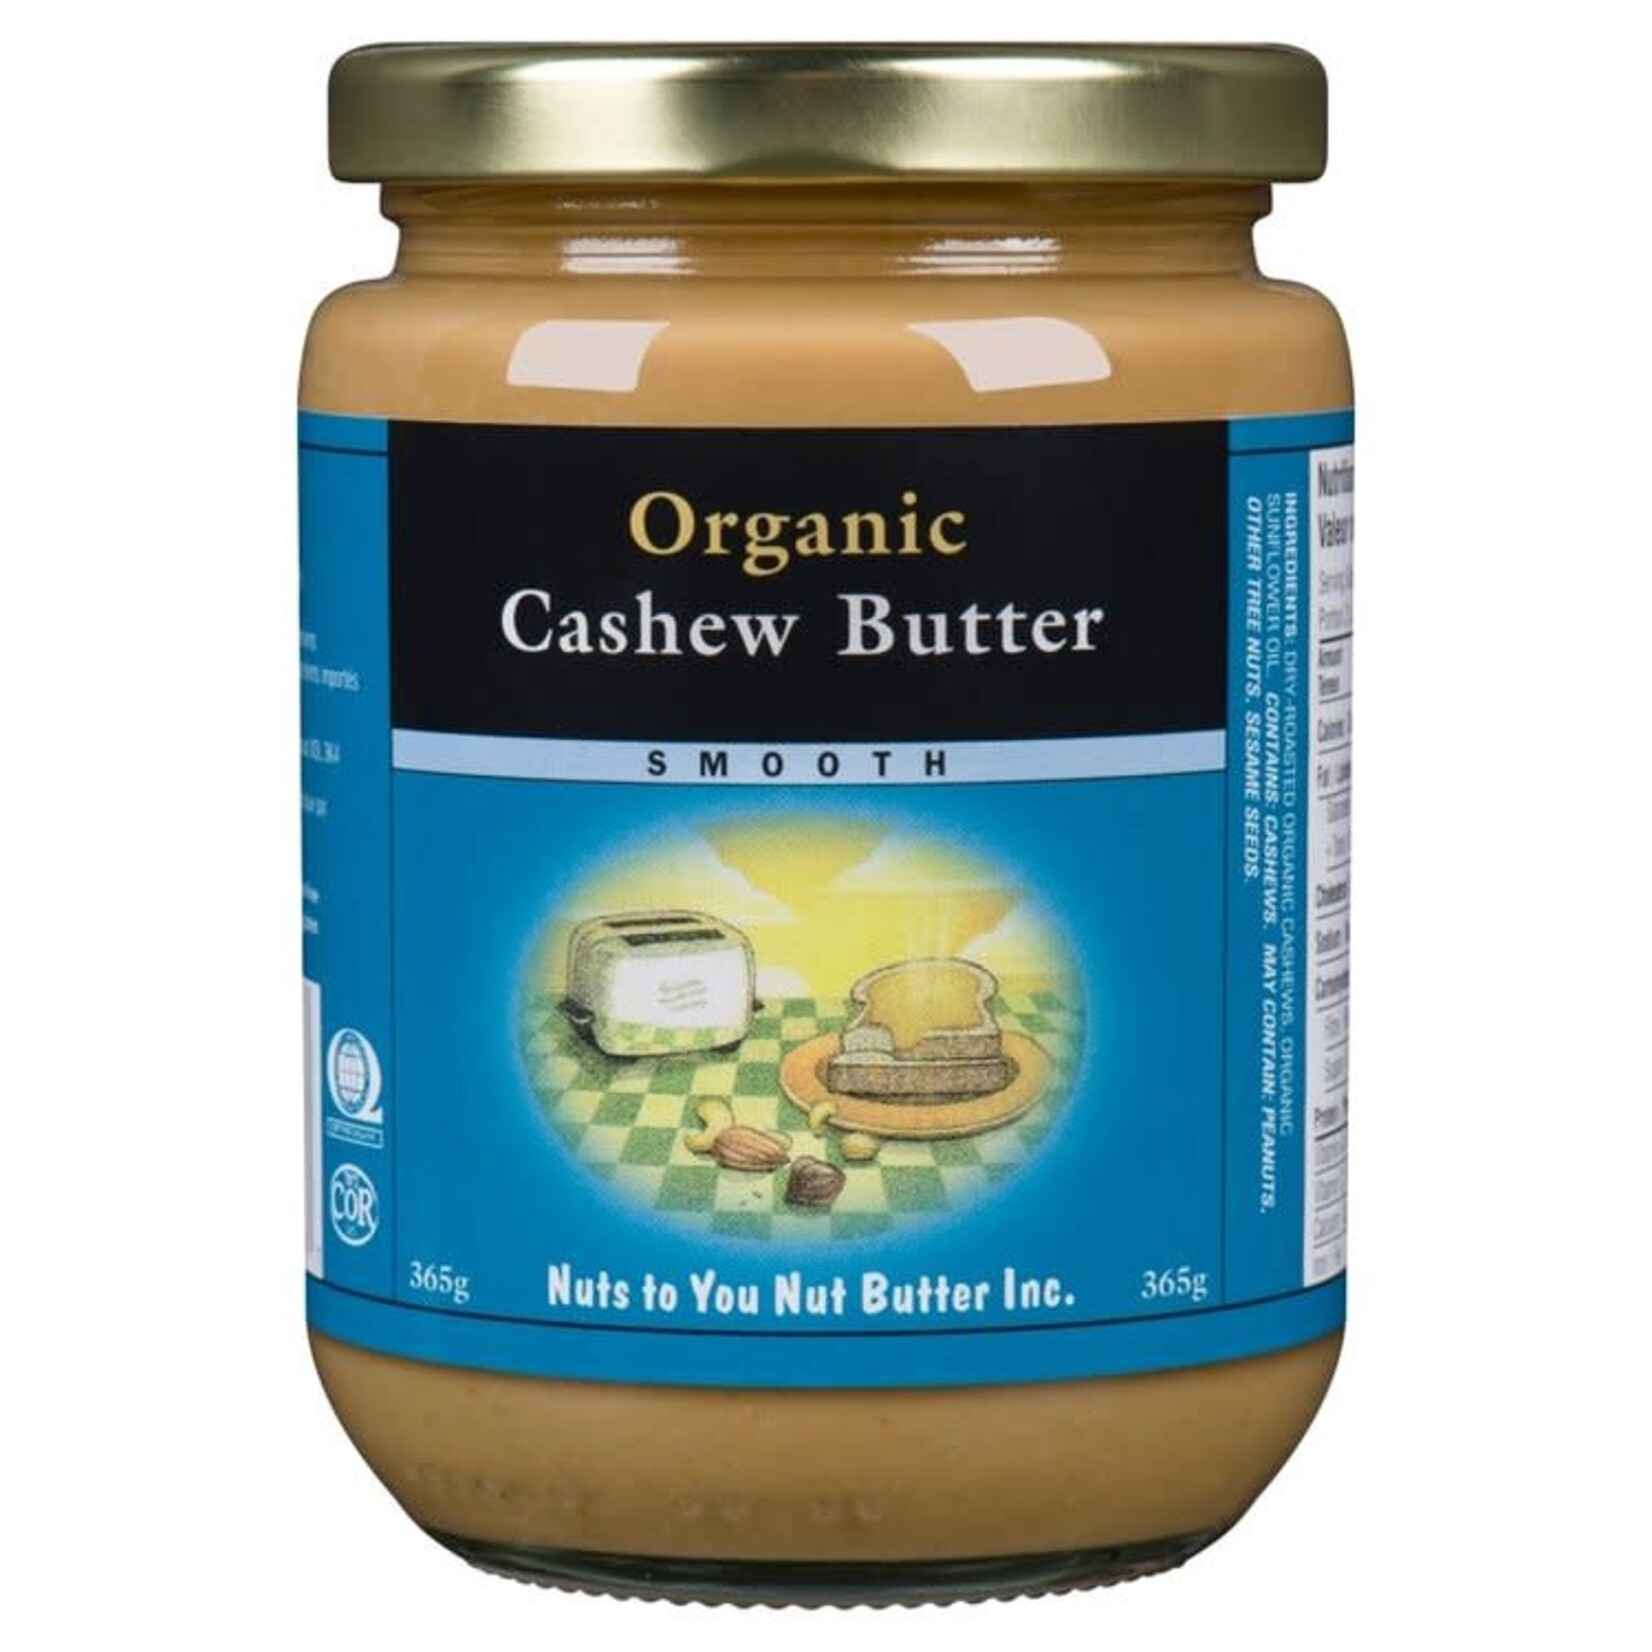 NUTS TO YOU NUTS TO YOU ORGANIC CASHEW BUTTER SMOOTH 365G